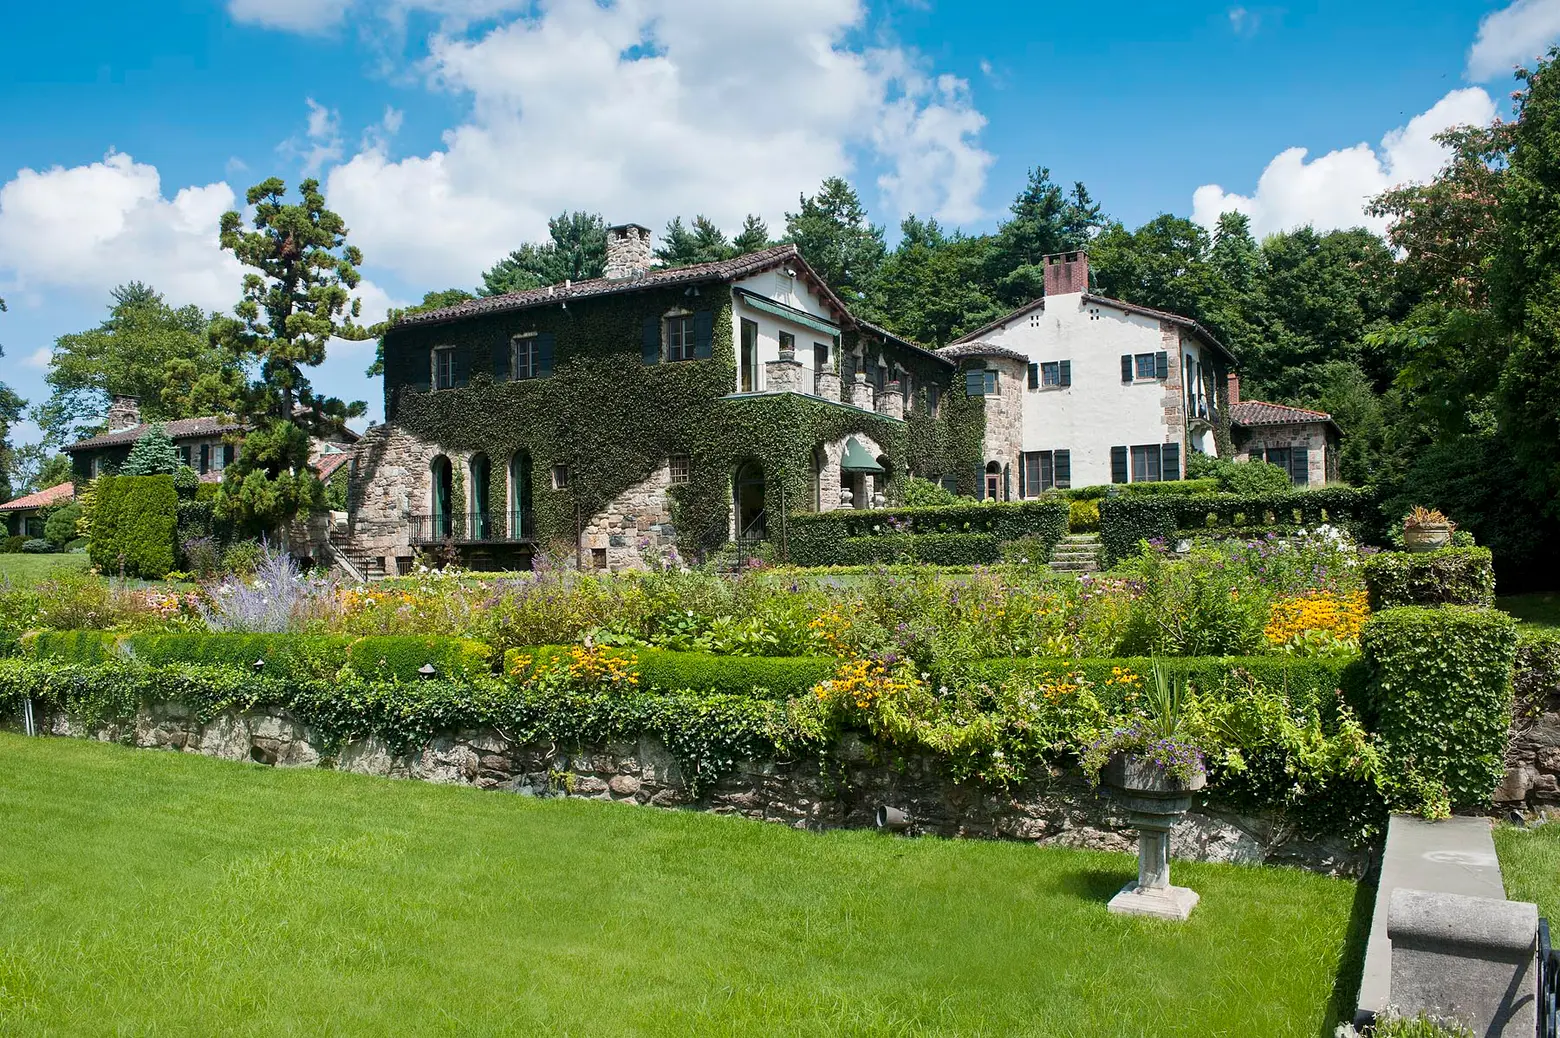 This incredible Italian-style villa is asking $9.2M in Greenwich, CT